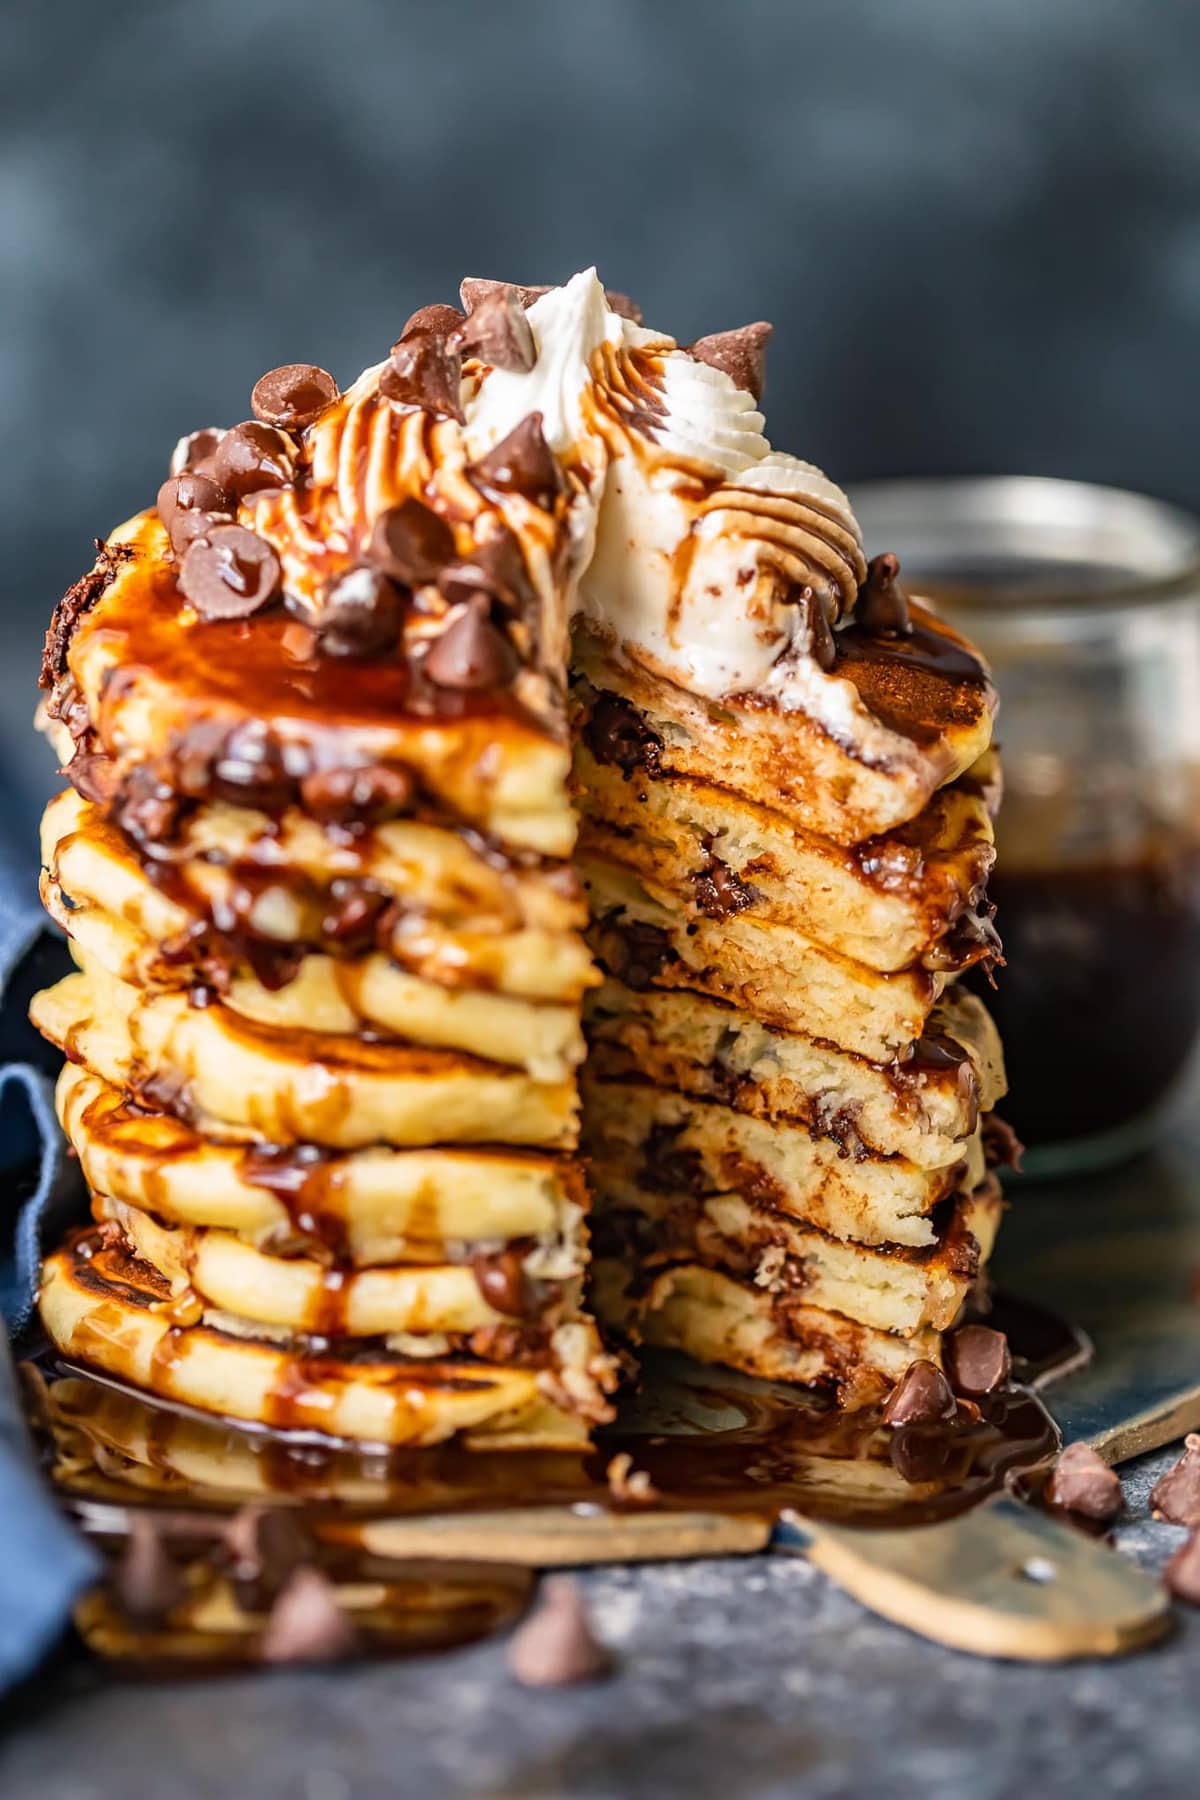 A stack of chocolate chip pancakes with a wedge cut out